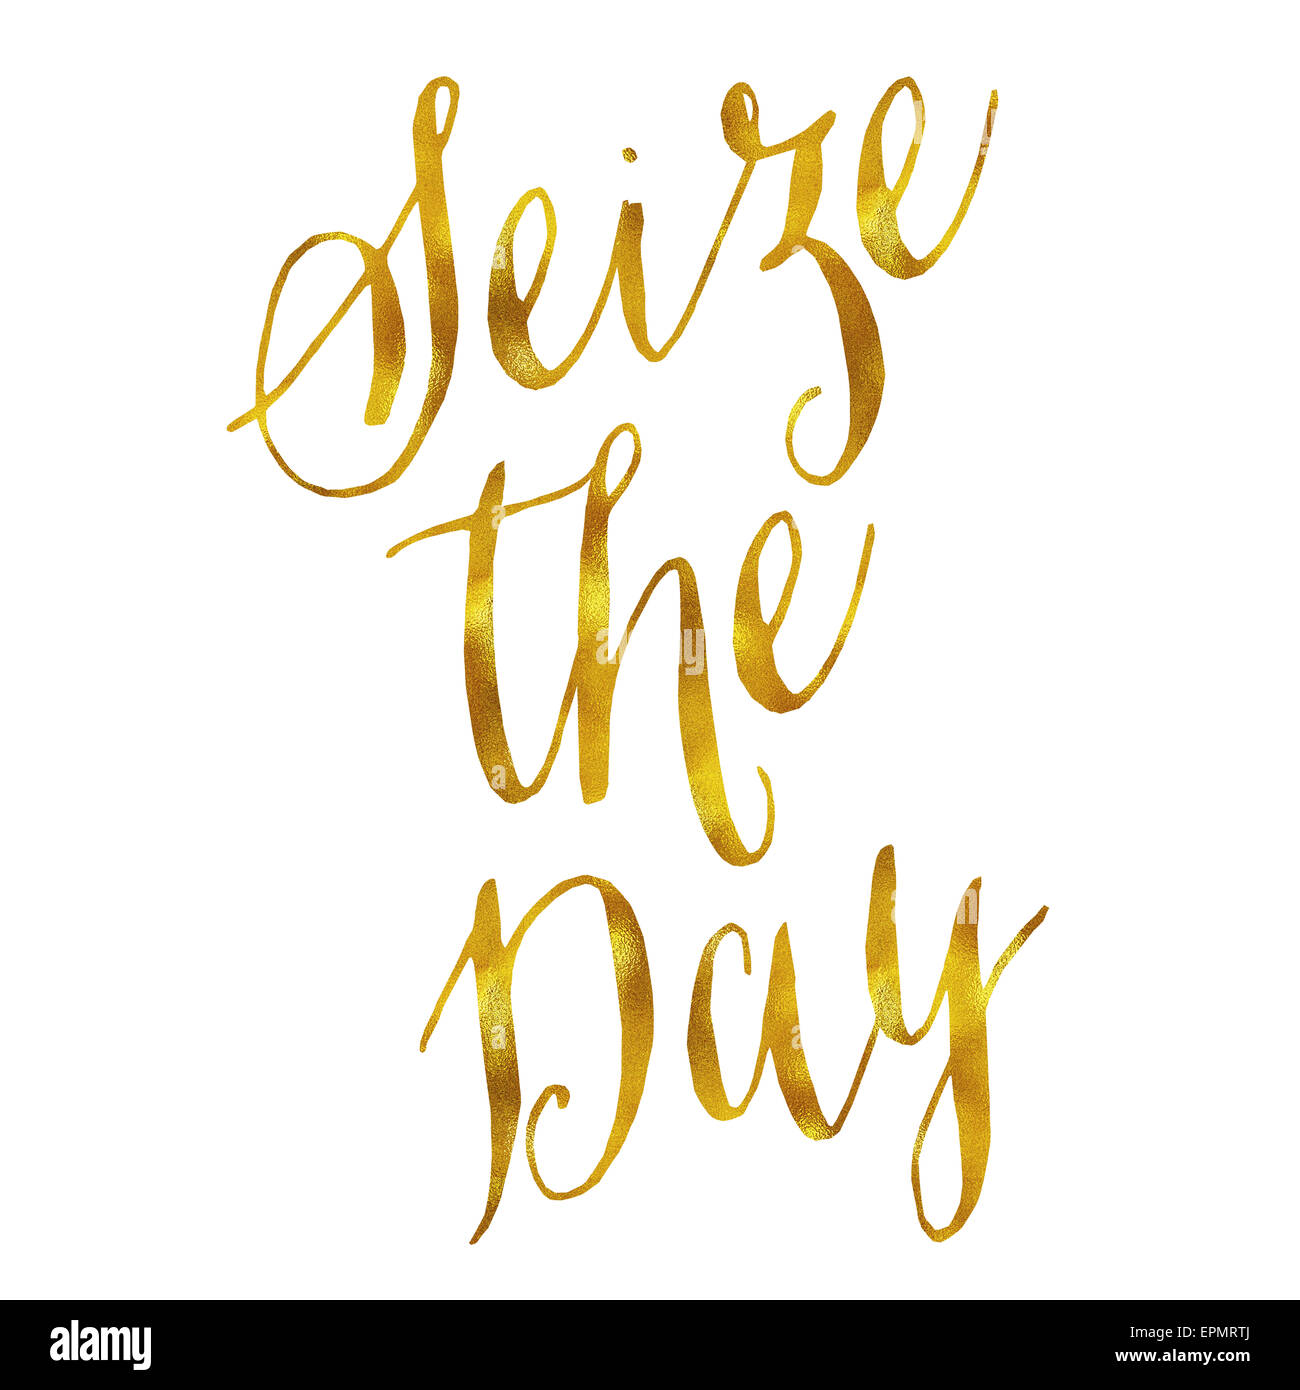 Seize The Day Carpe Diem Gold Faux Foil Metallic Glitter Quote Isolated on  White Background Stock Photo - Alamy